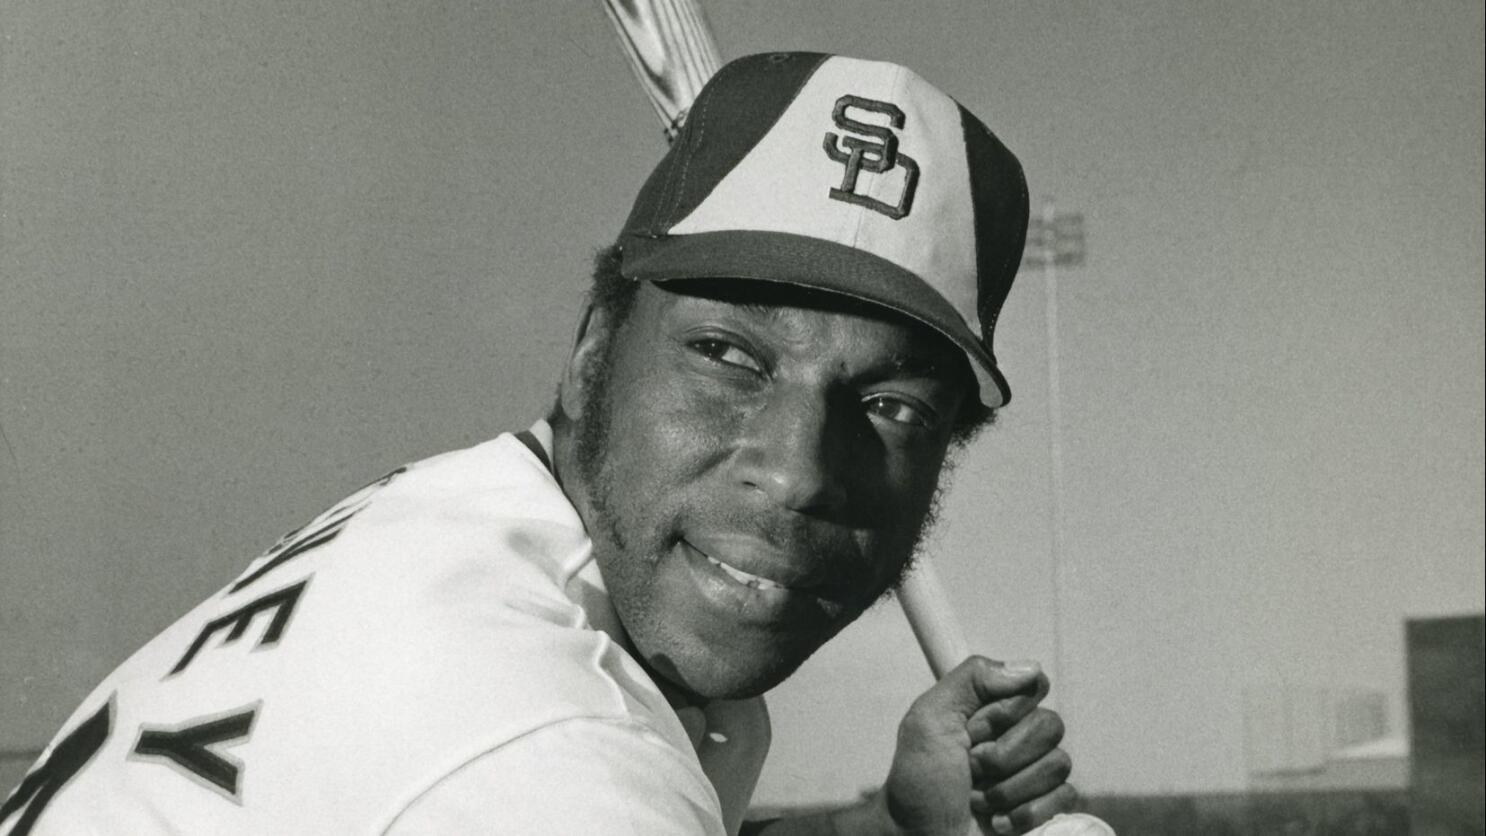 Former Padres first baseman Willie McCovey turns 80 today